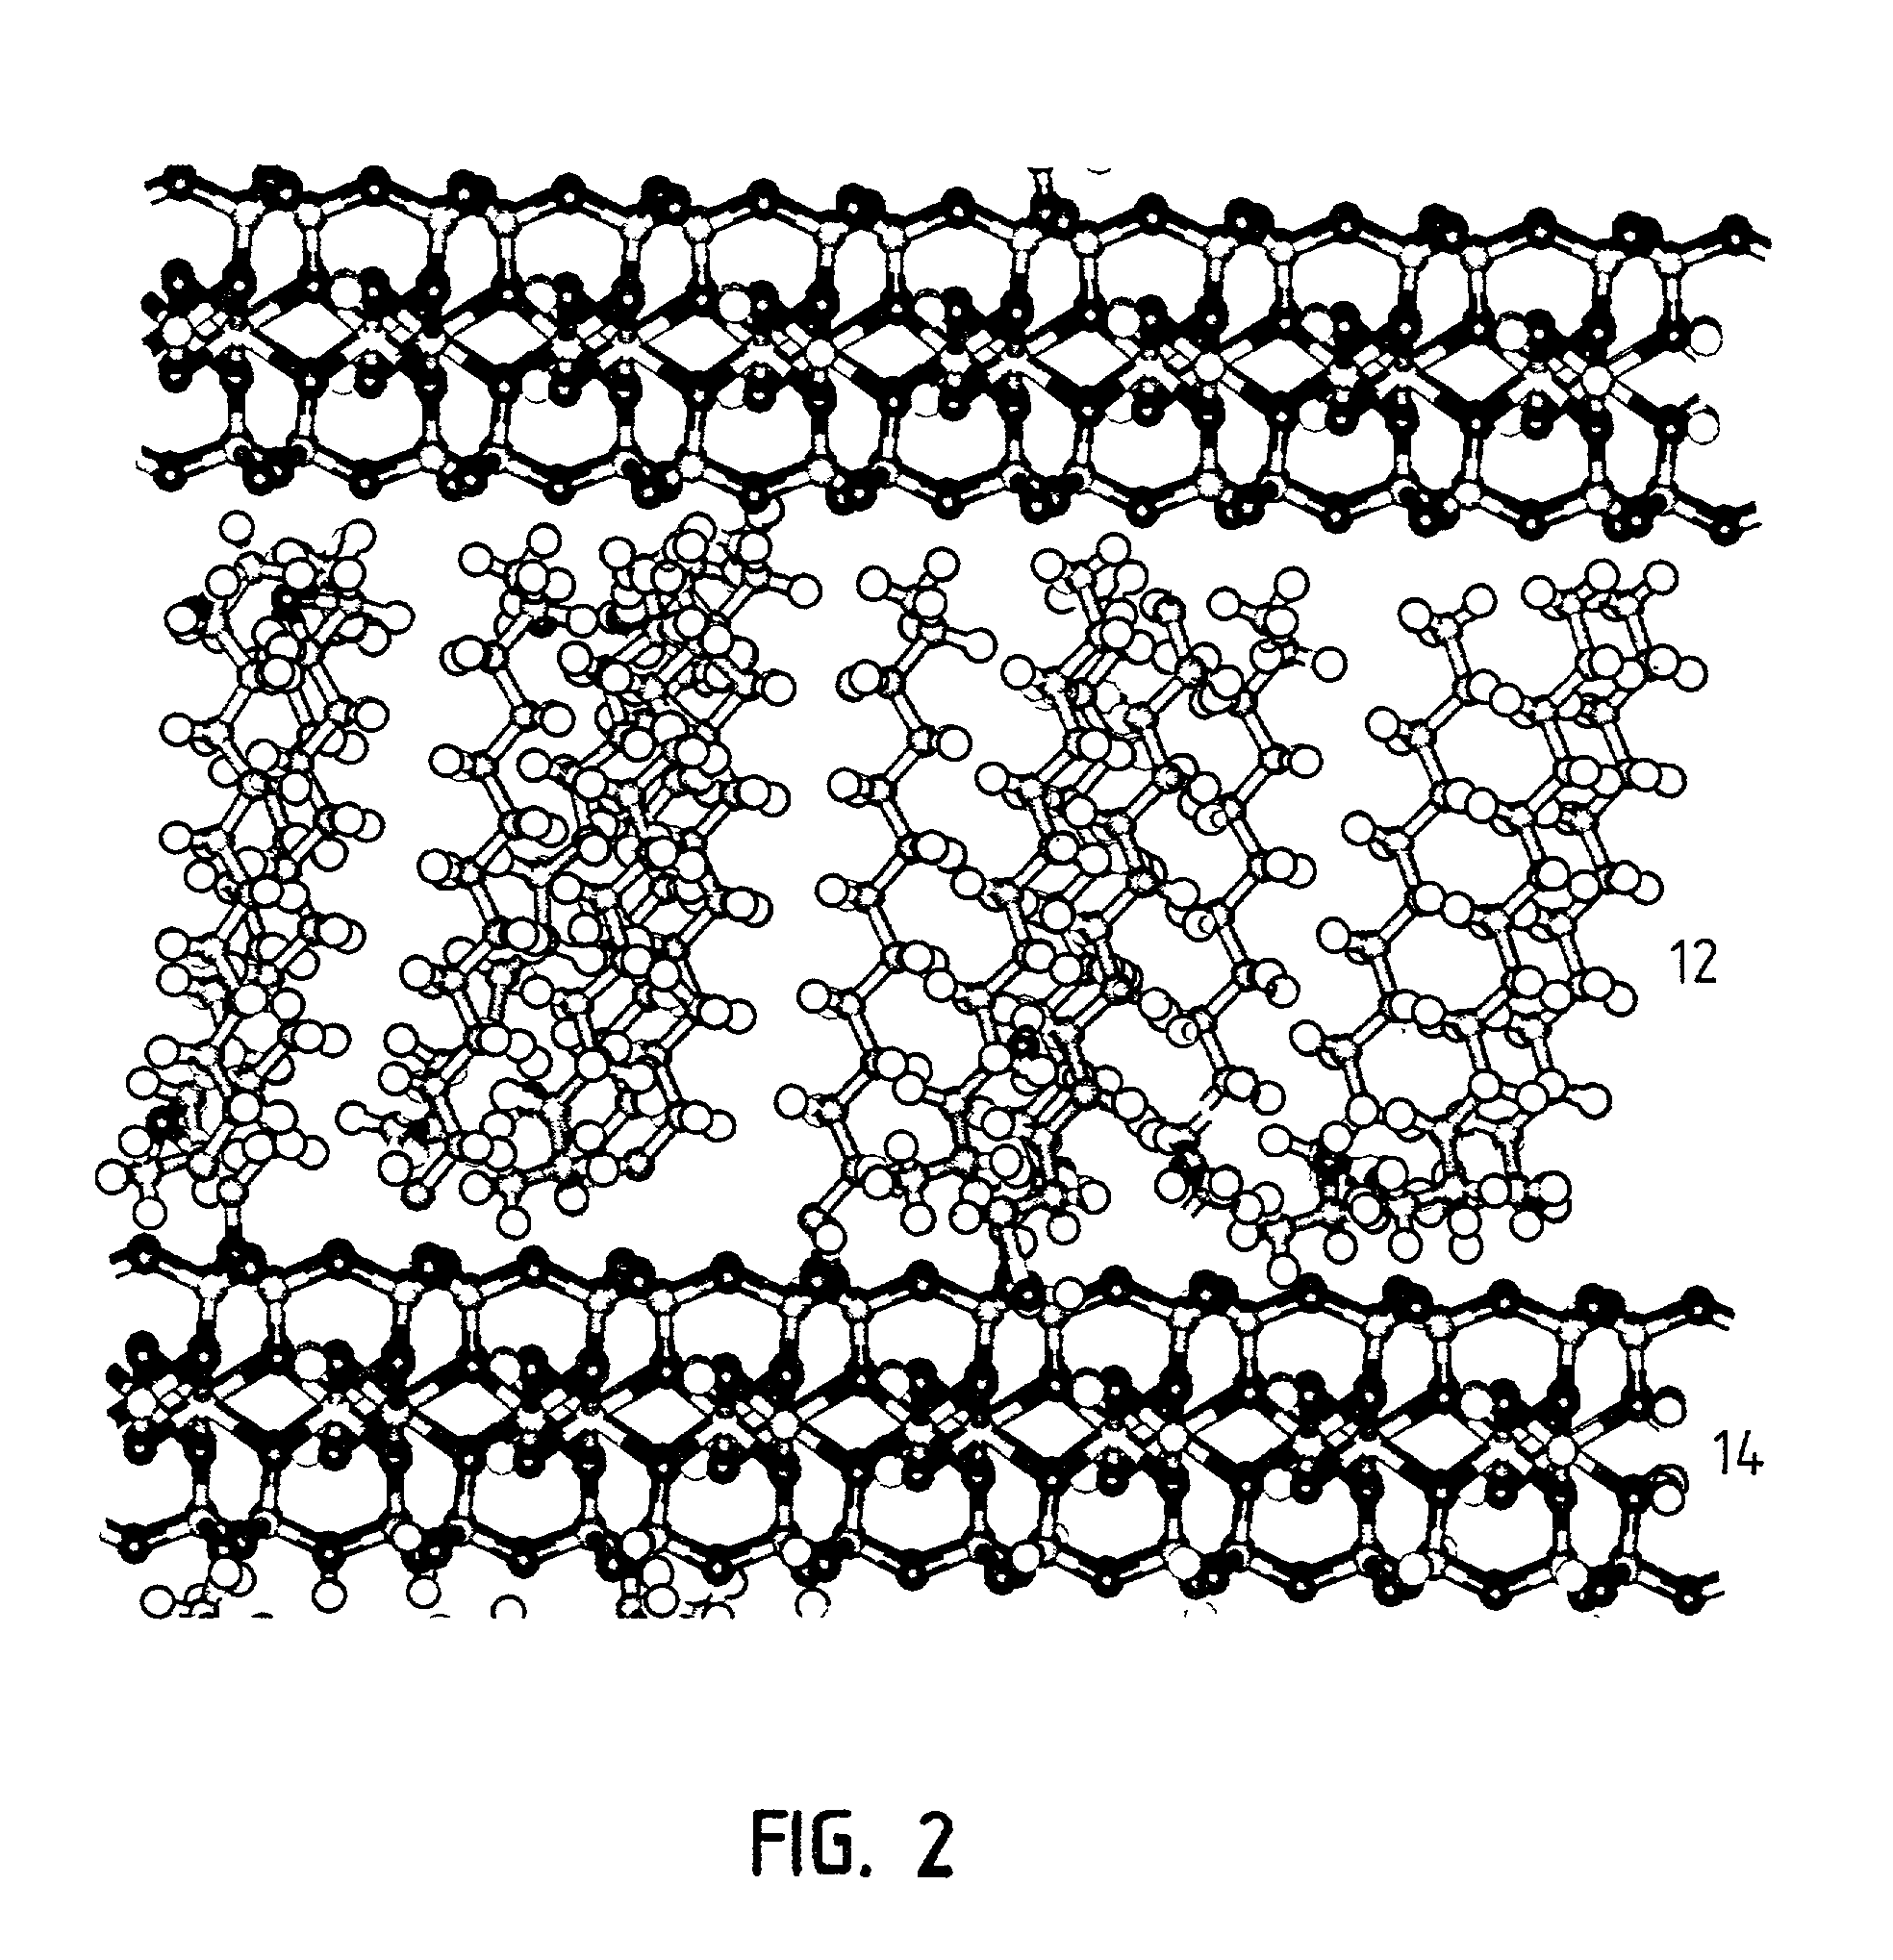 Allergen absorbent, blocking, and deactivating compositions and method